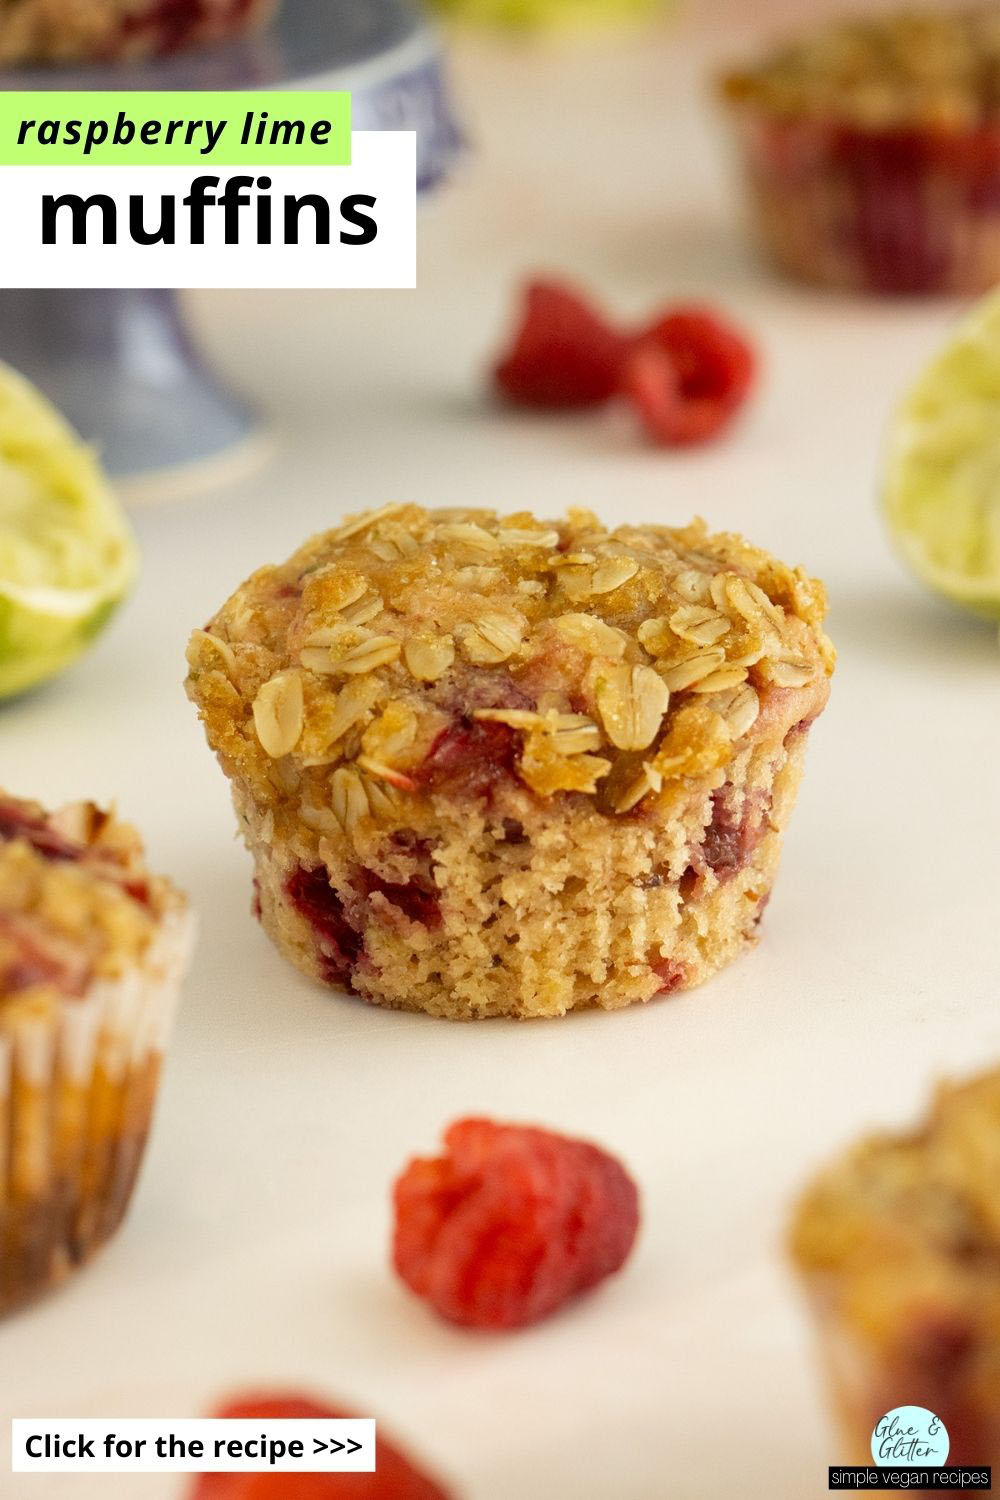 vegan raspberry muffins on a table with raspberries around them, text overlay